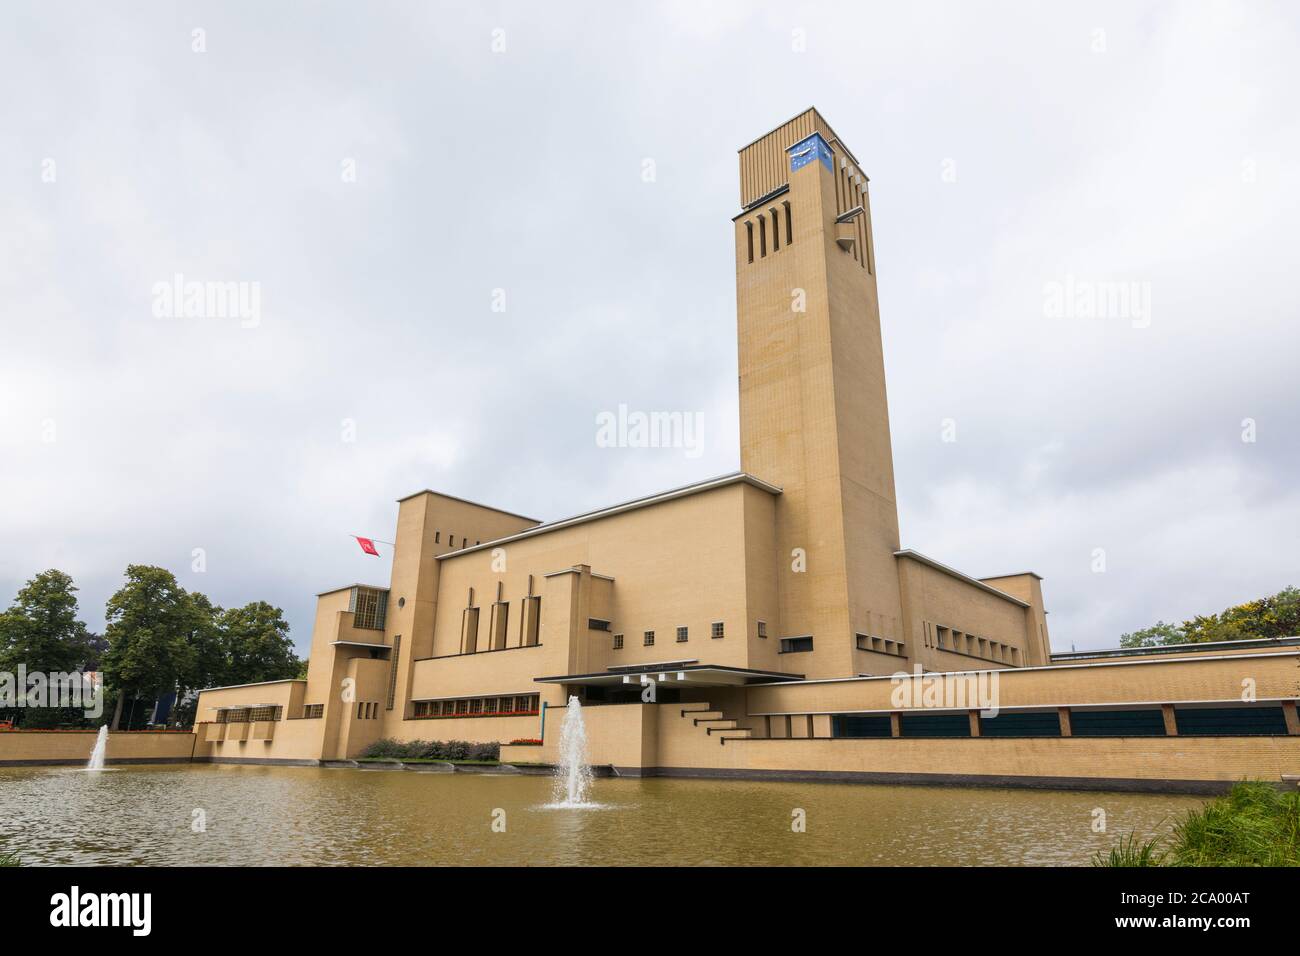 Hilversum town hall in the Netherlands, architecture Willem Marinus Dudok, completed in 1931. Stock Photo